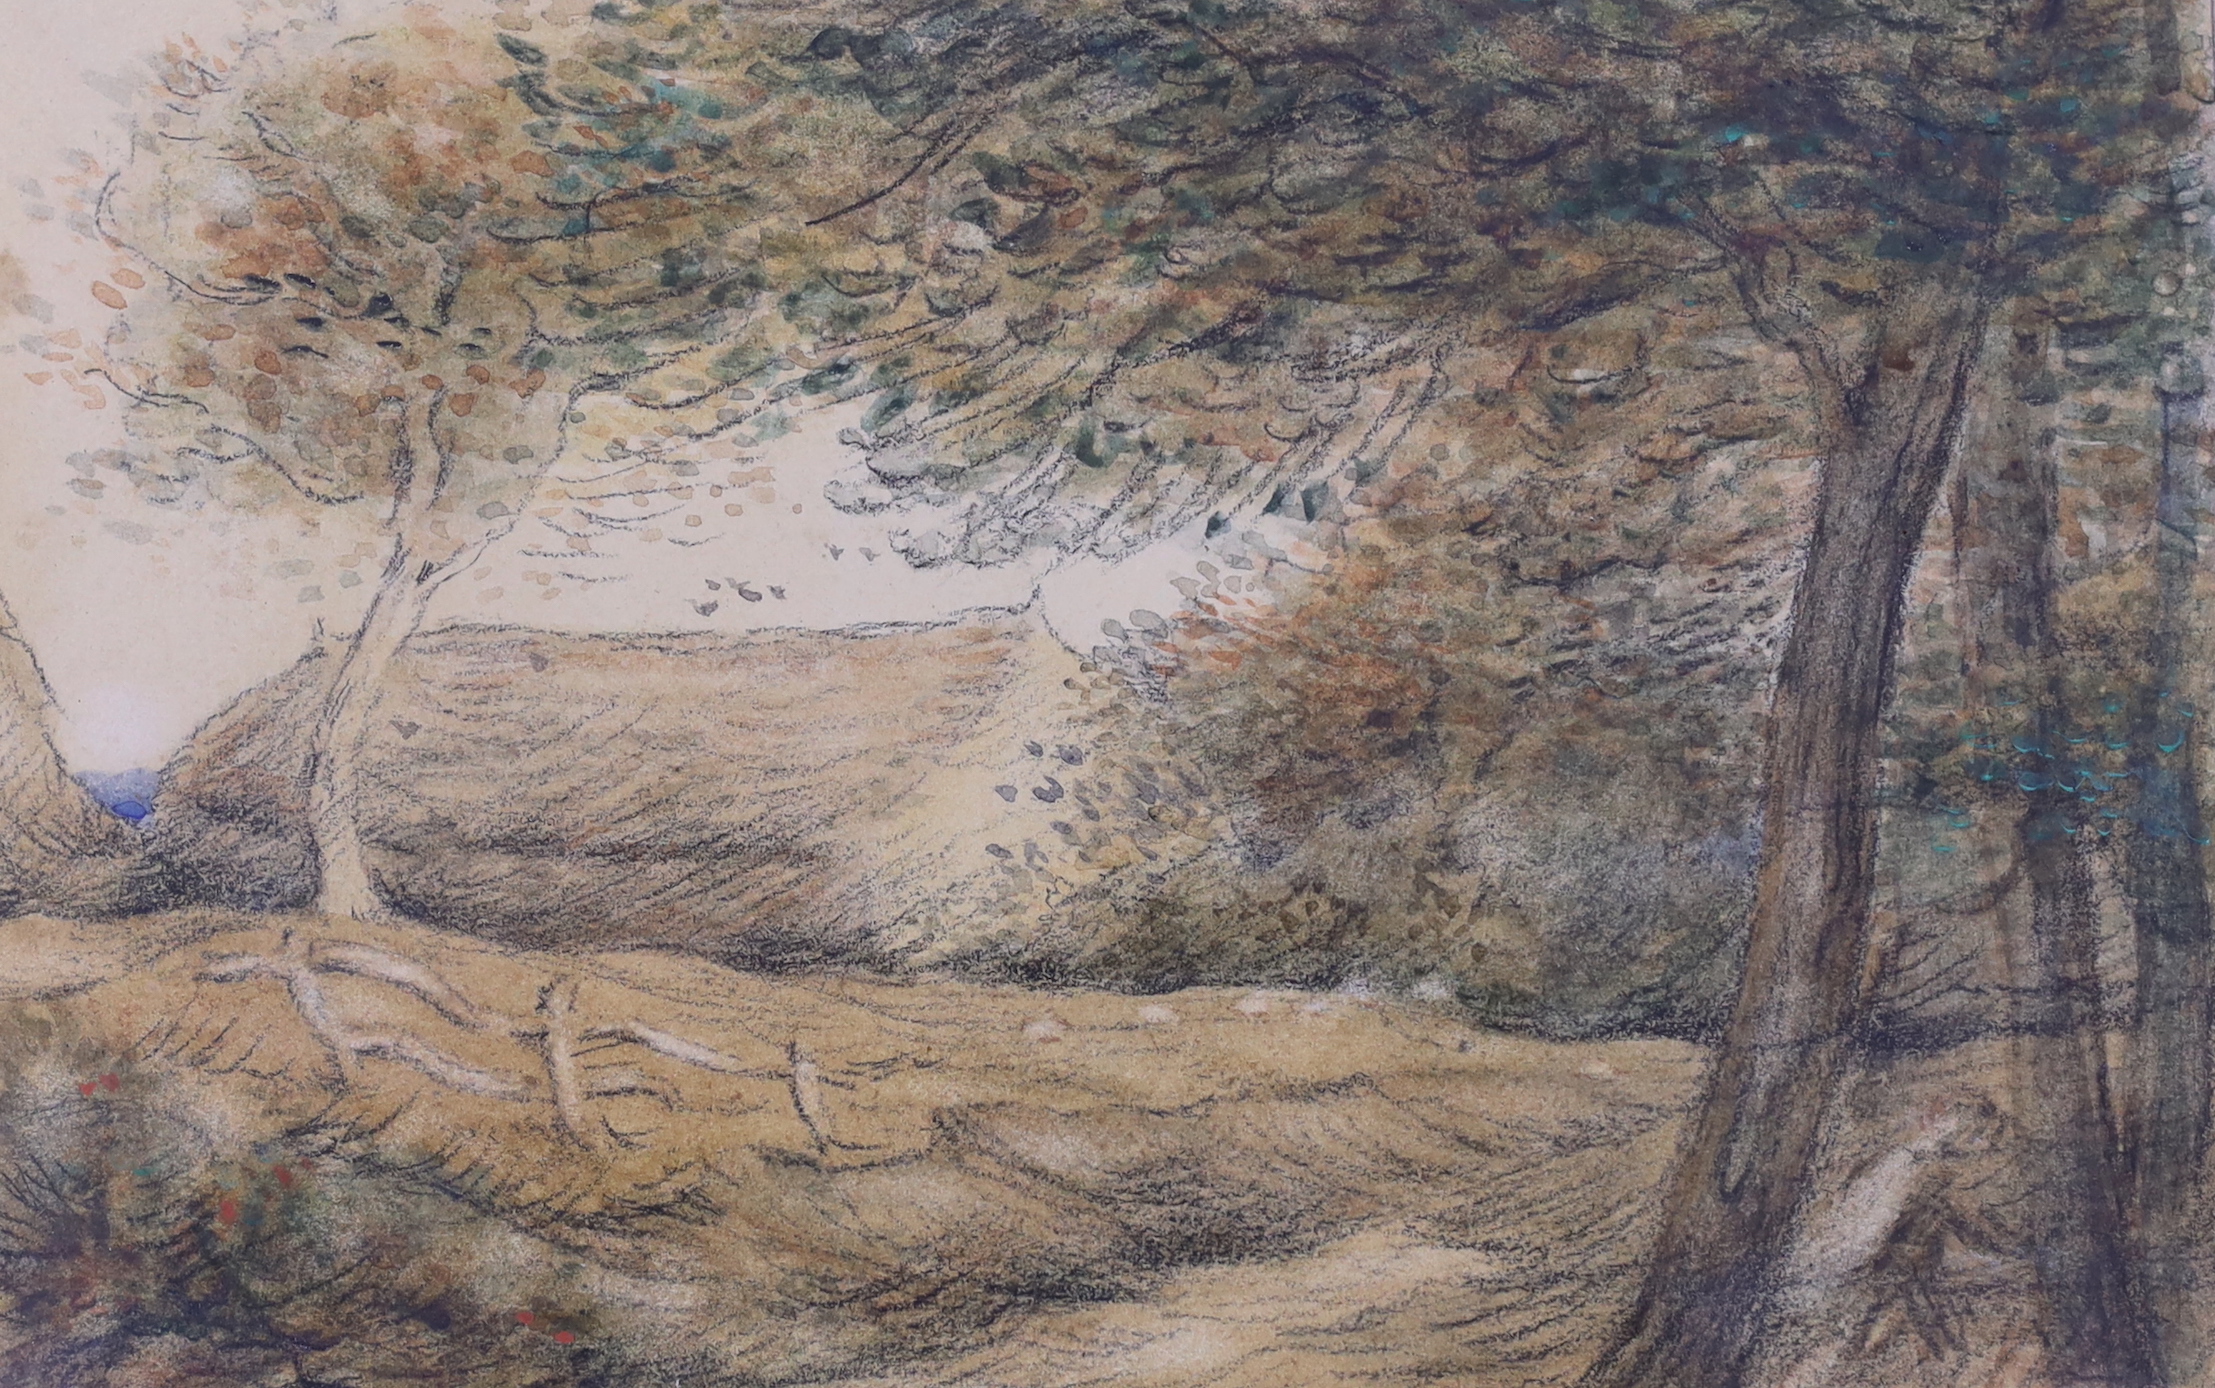 Selwyn Image (1849-1930), pencil and watercolour, Landscape with trees before barns, signed and dated 1901, 17 x 26cm